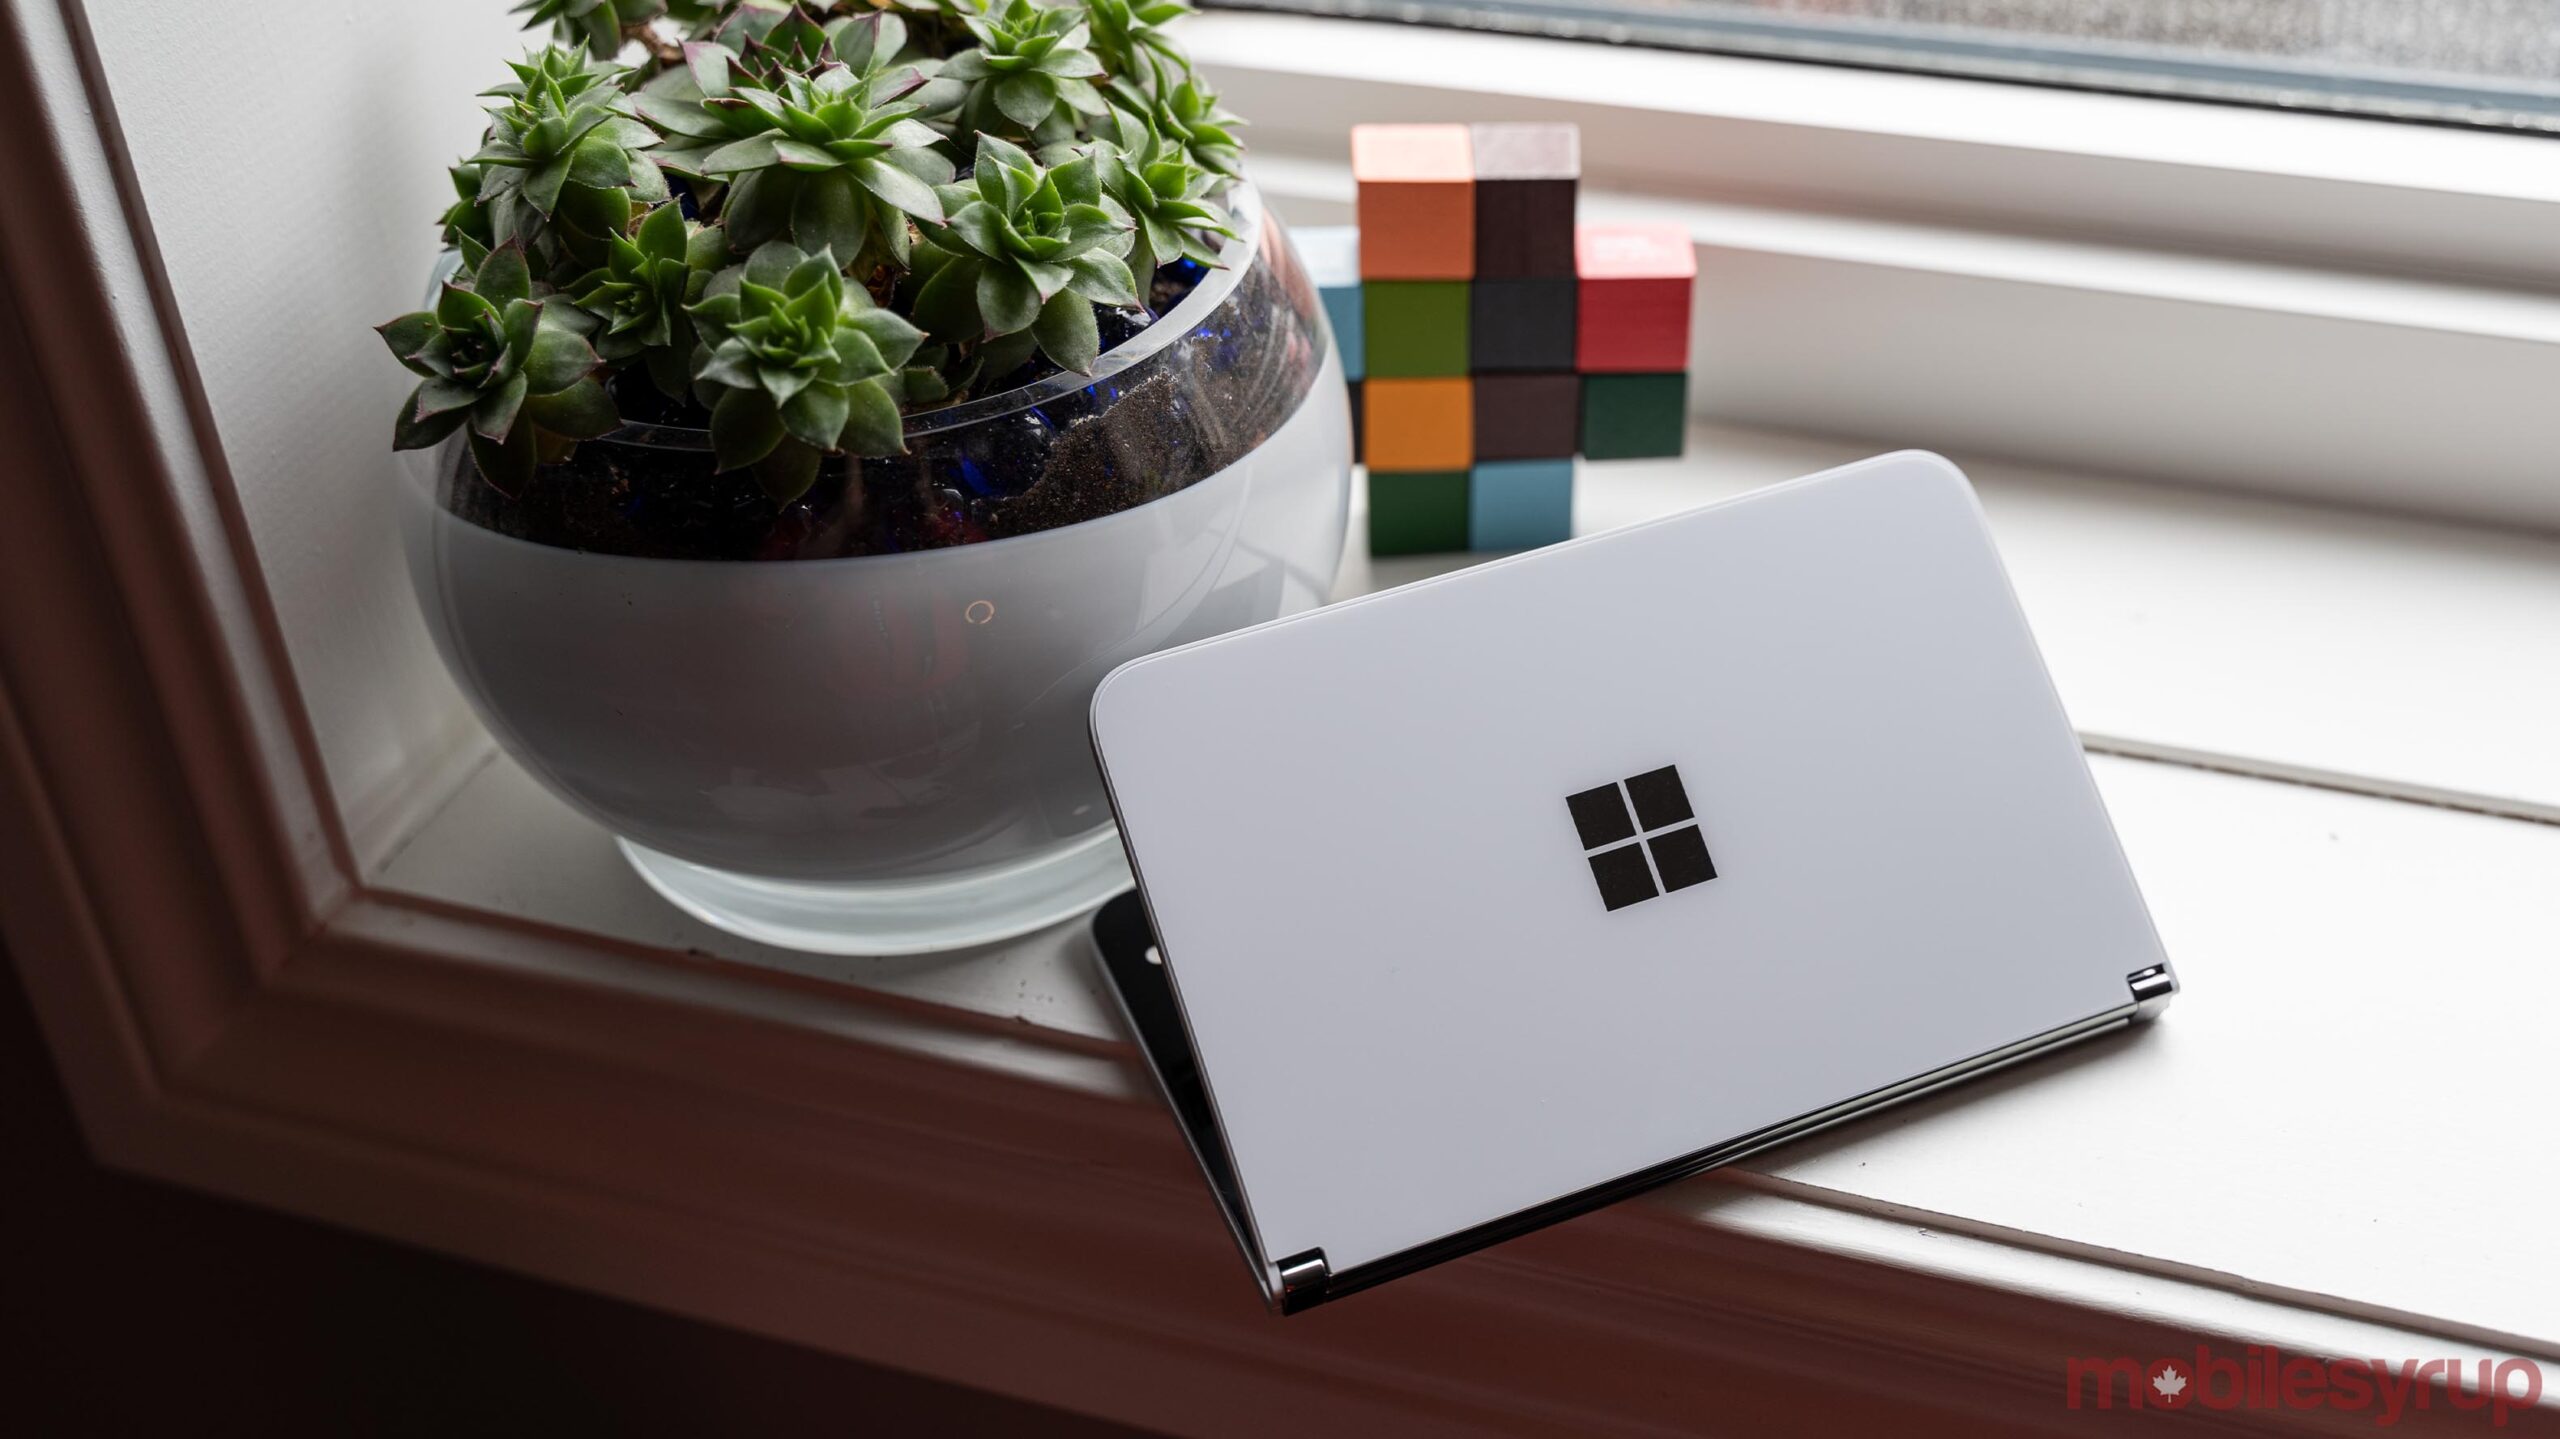 Microsoft Surface Duo partially folded